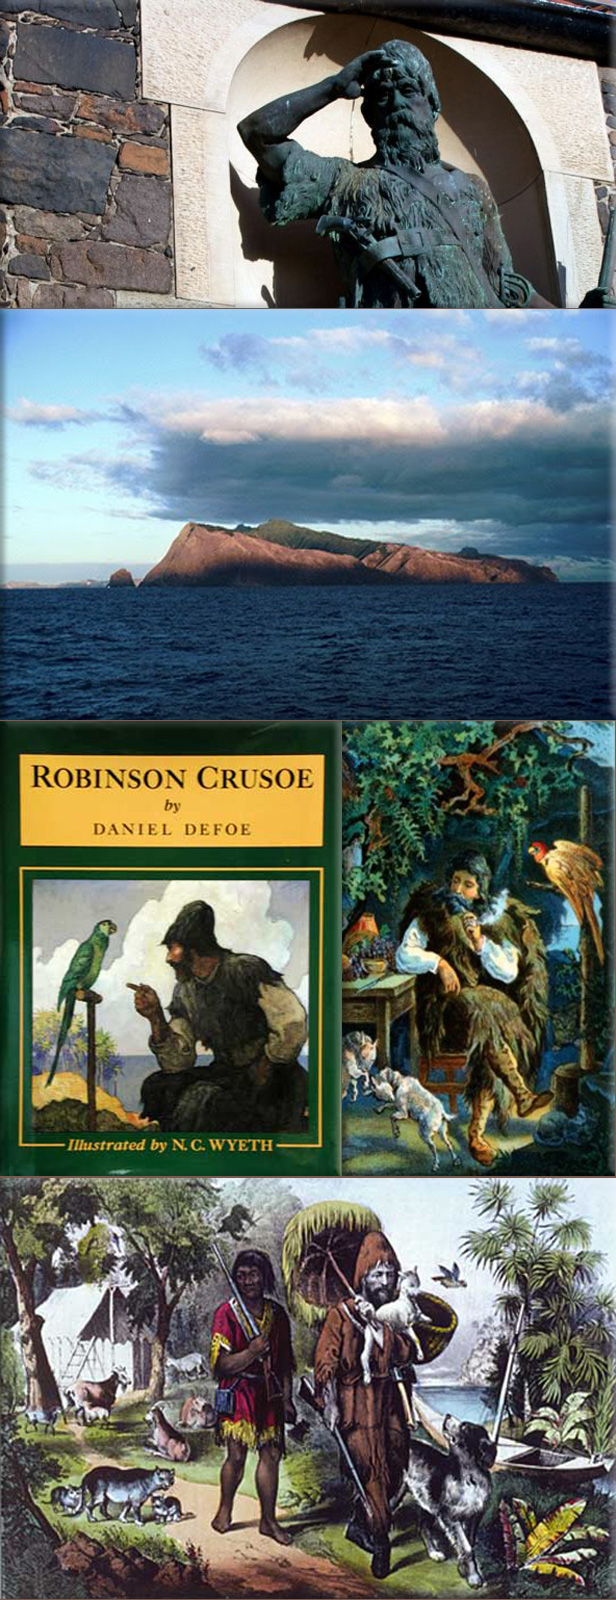 Robinson Crusoe is a novel by Daniel Defoe that was first published in 1719, inspired by the rescue of Alexander Selkirk, shipwrecked on a desert island